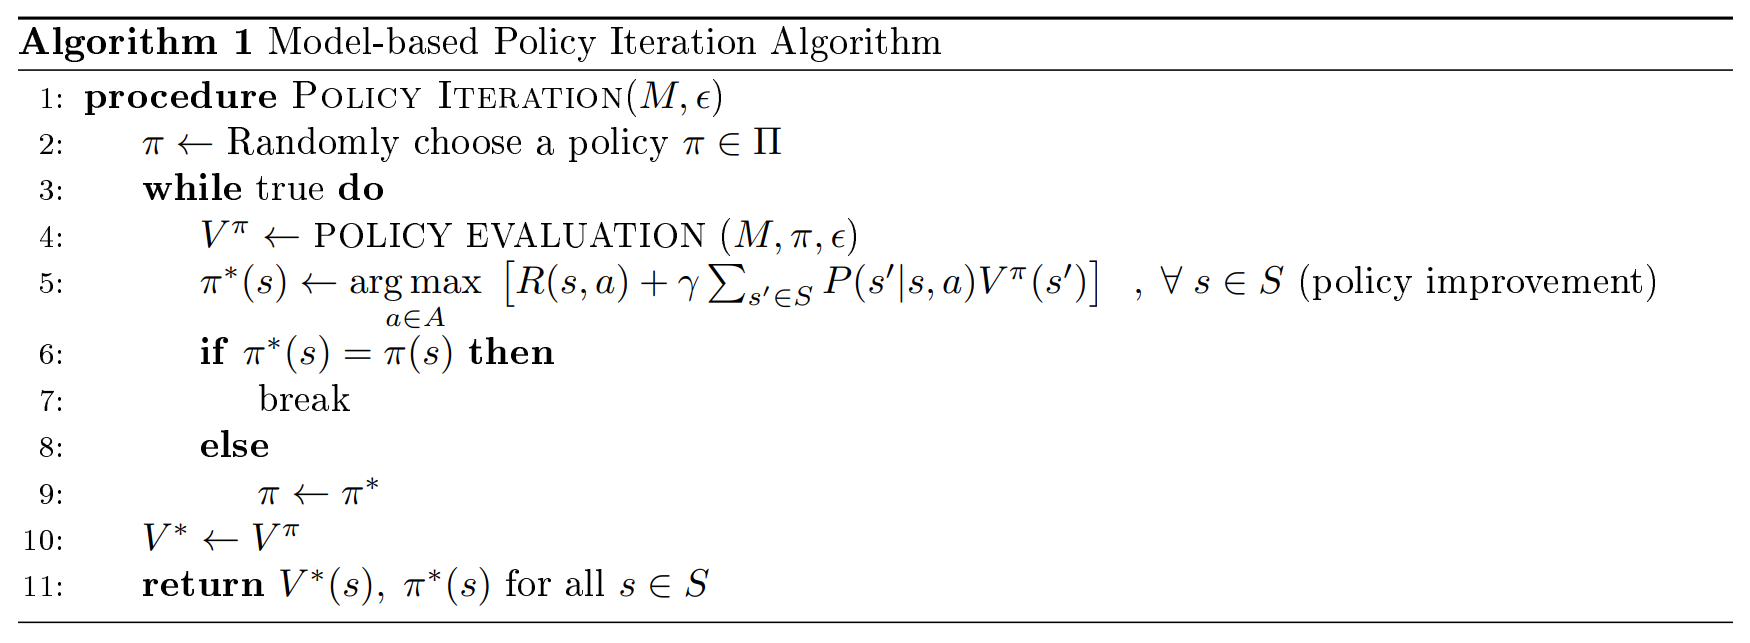 docs/stanford-cs234-notes-zh/img/fig4_alg_1.png